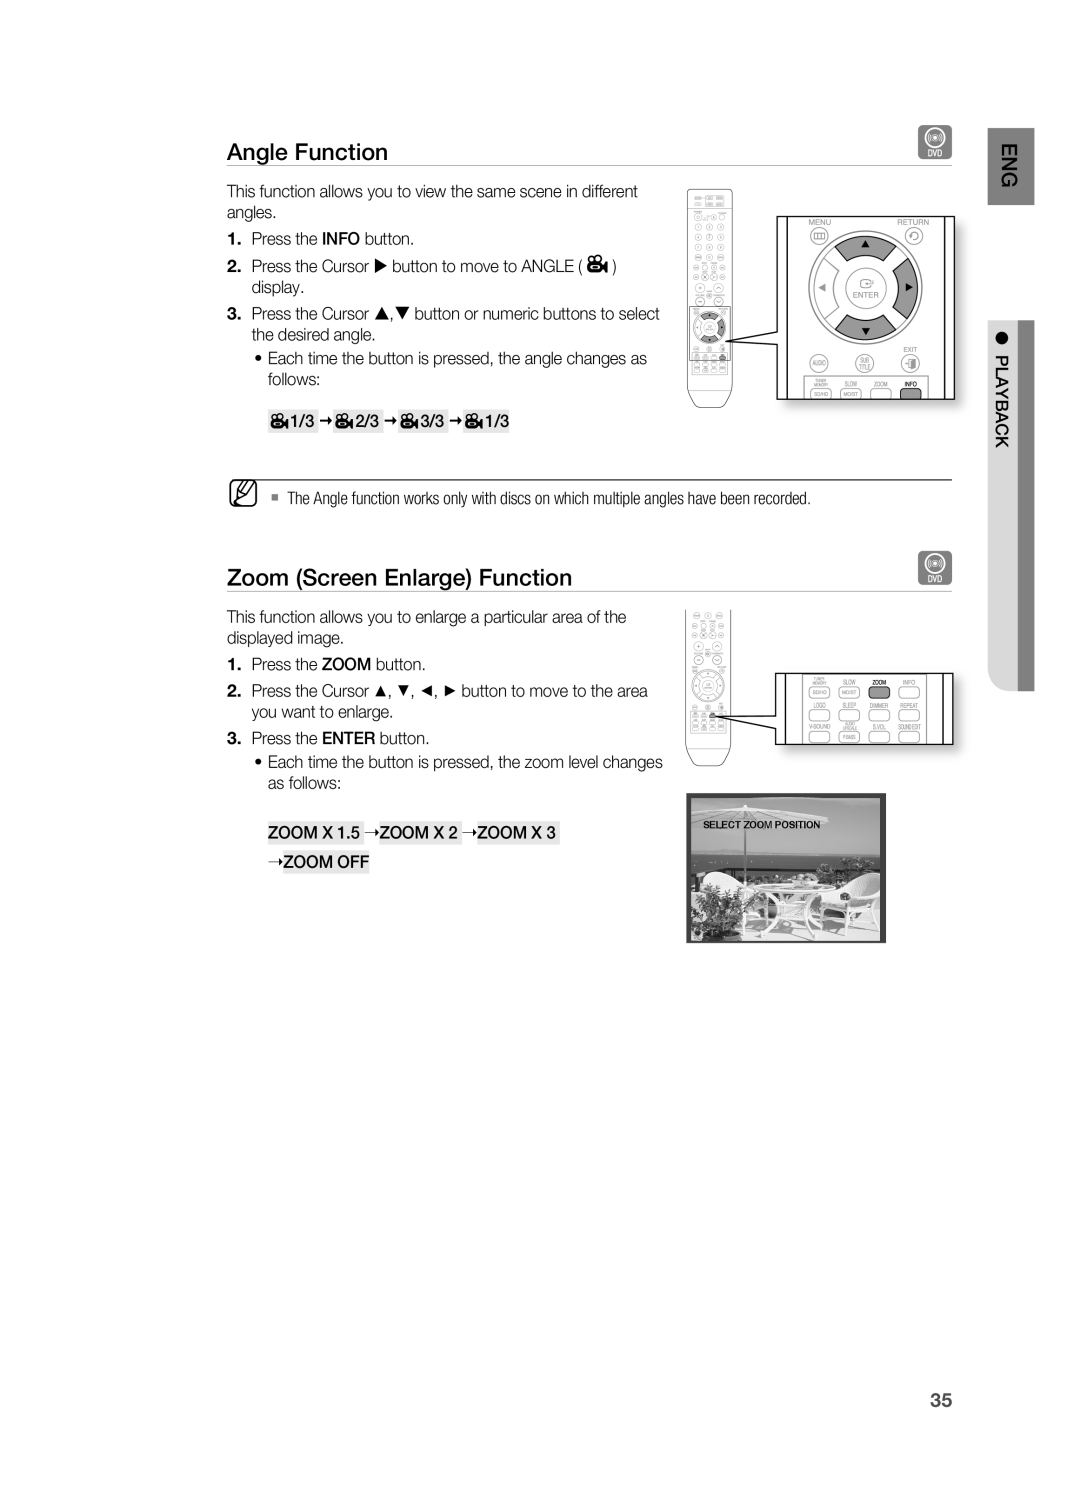 Samsung HT-X810 user manual Angle Function, Zoom Screen Enlarge Function 